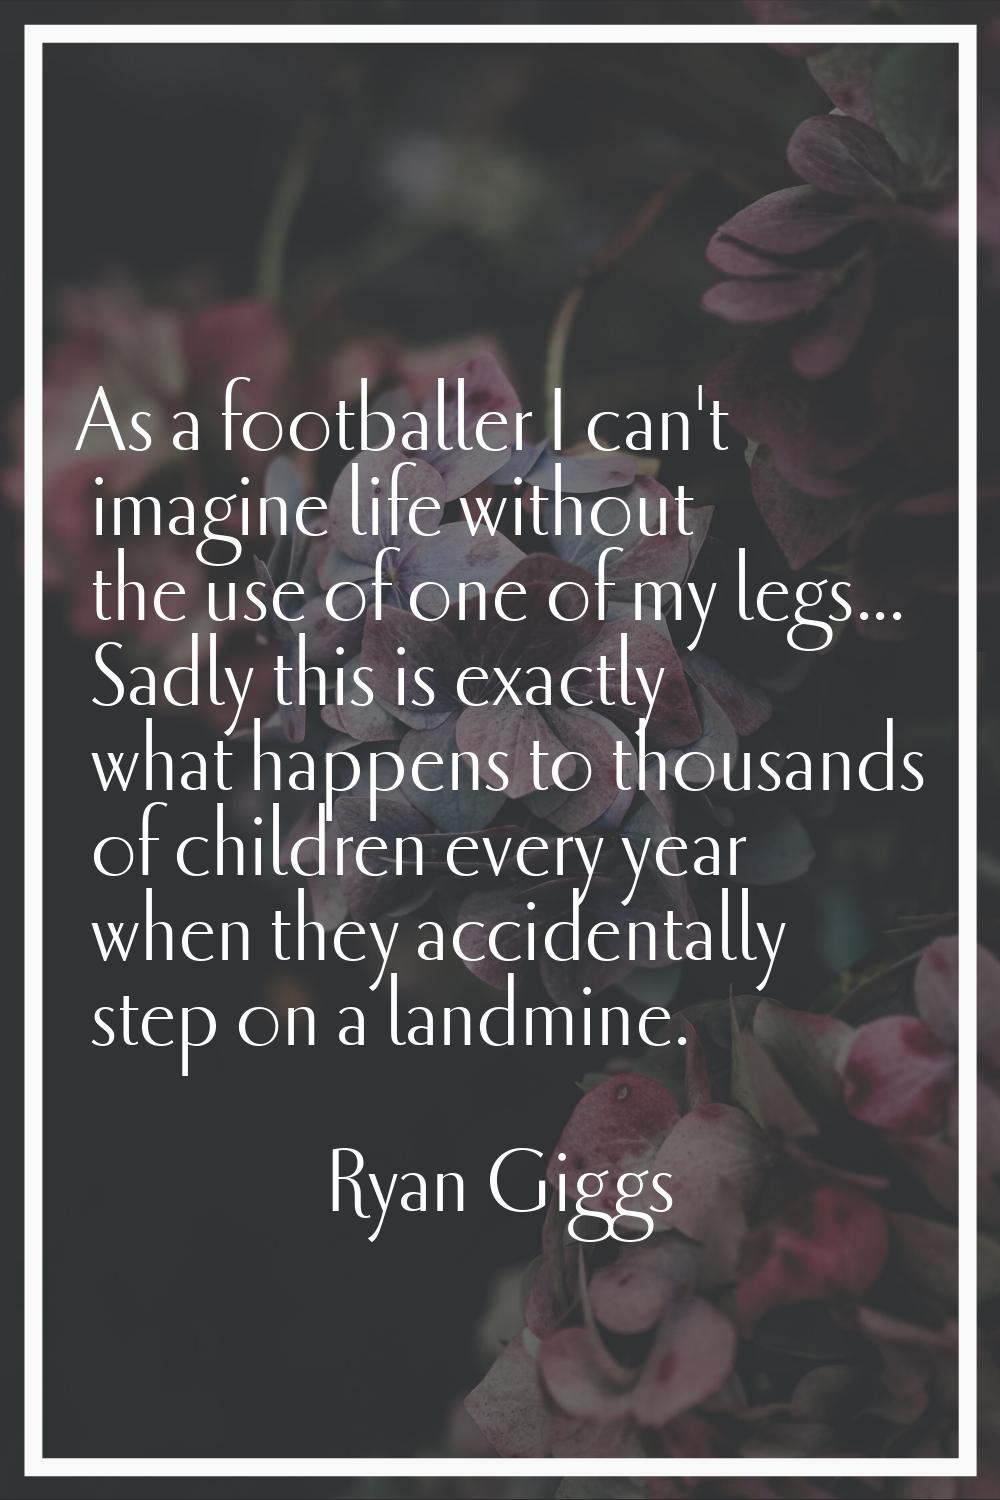 As a footballer I can't imagine life without the use of one of my legs... Sadly this is exactly wha